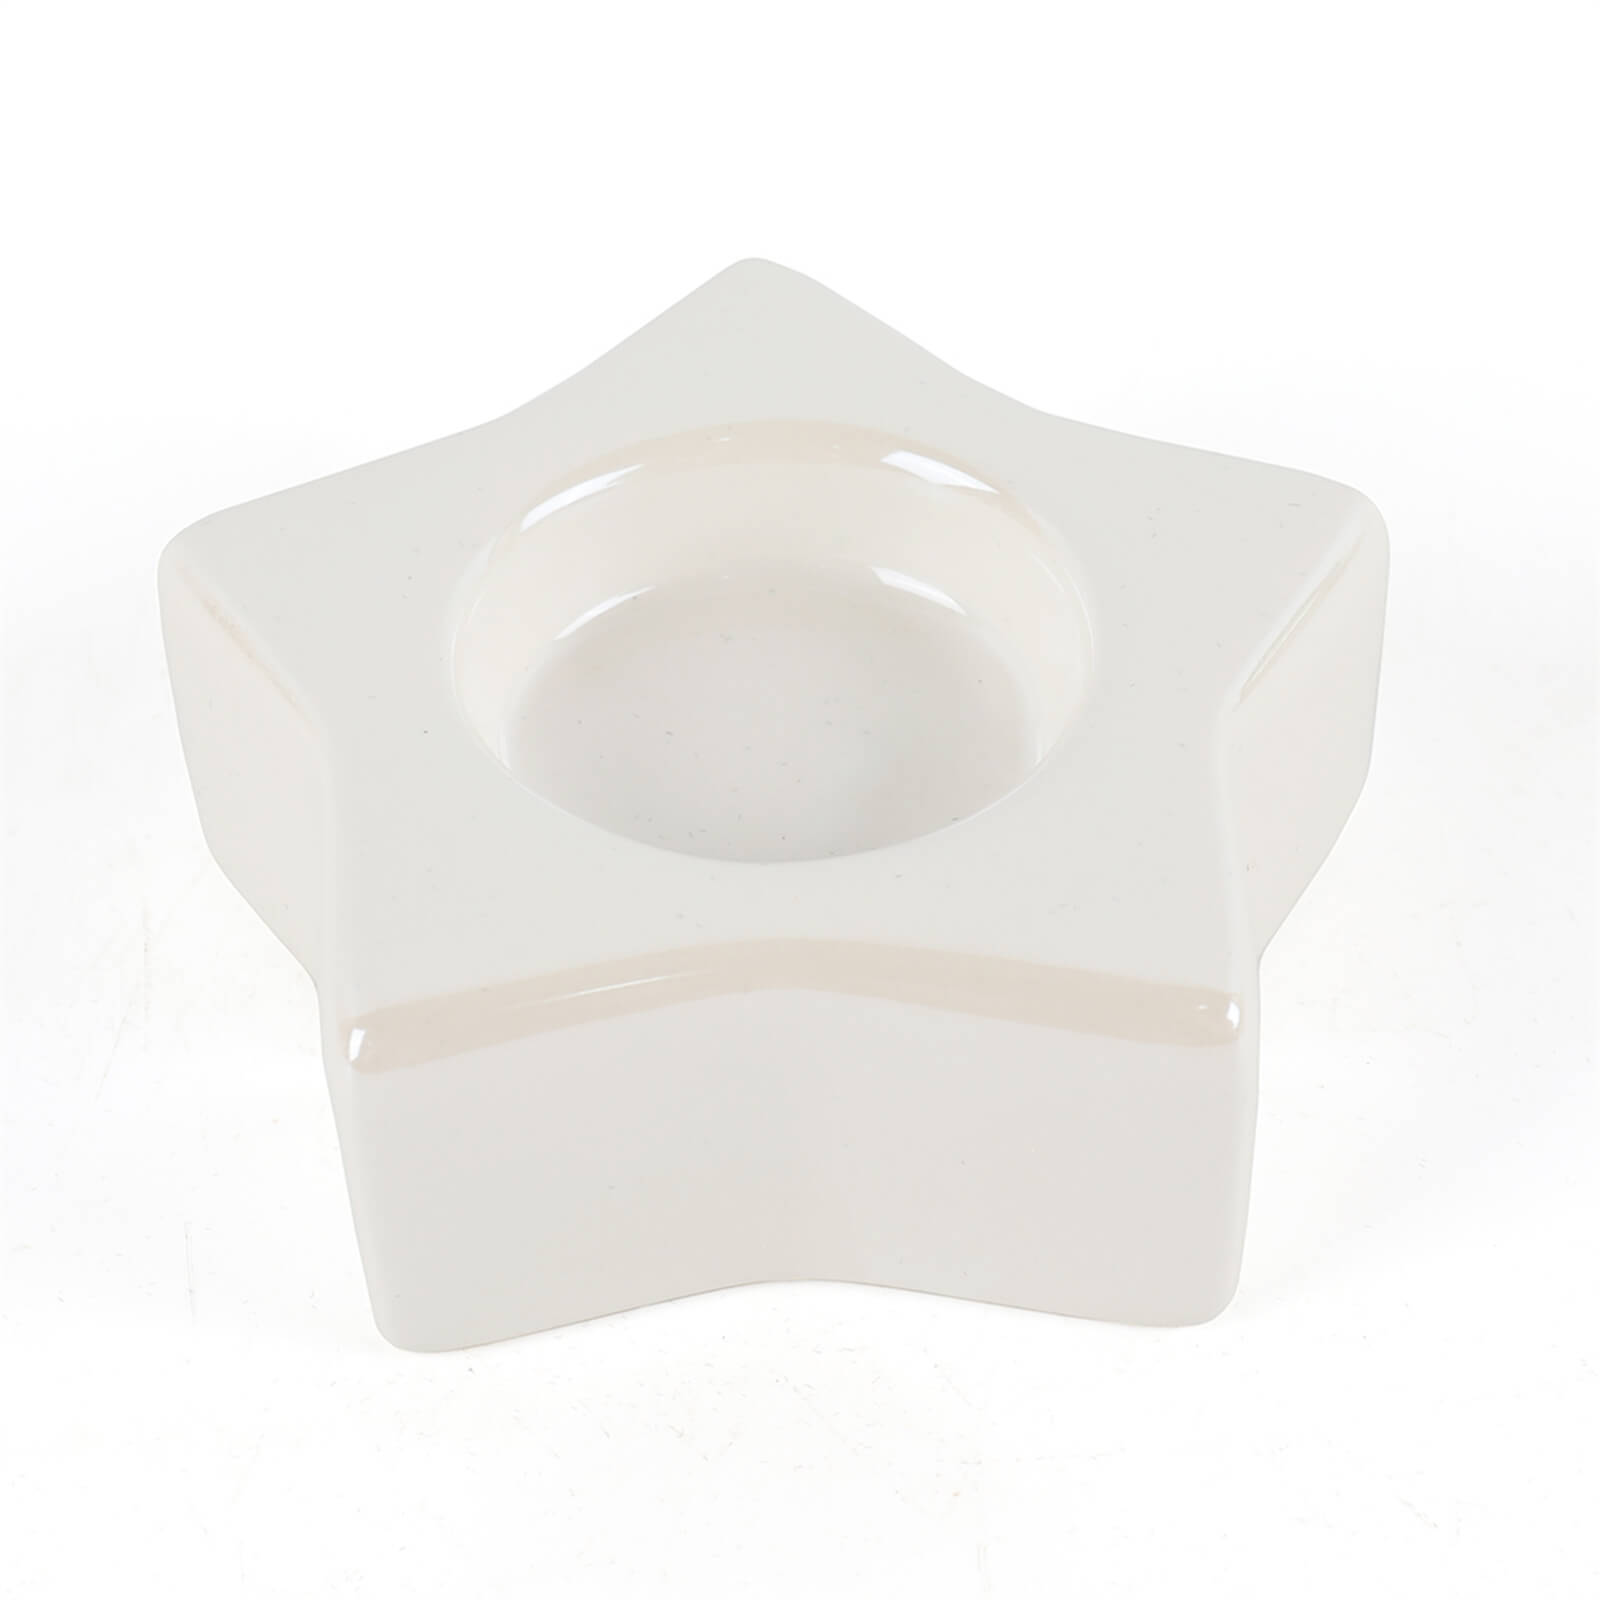 Pearl White Ceramic Star Candle Holder